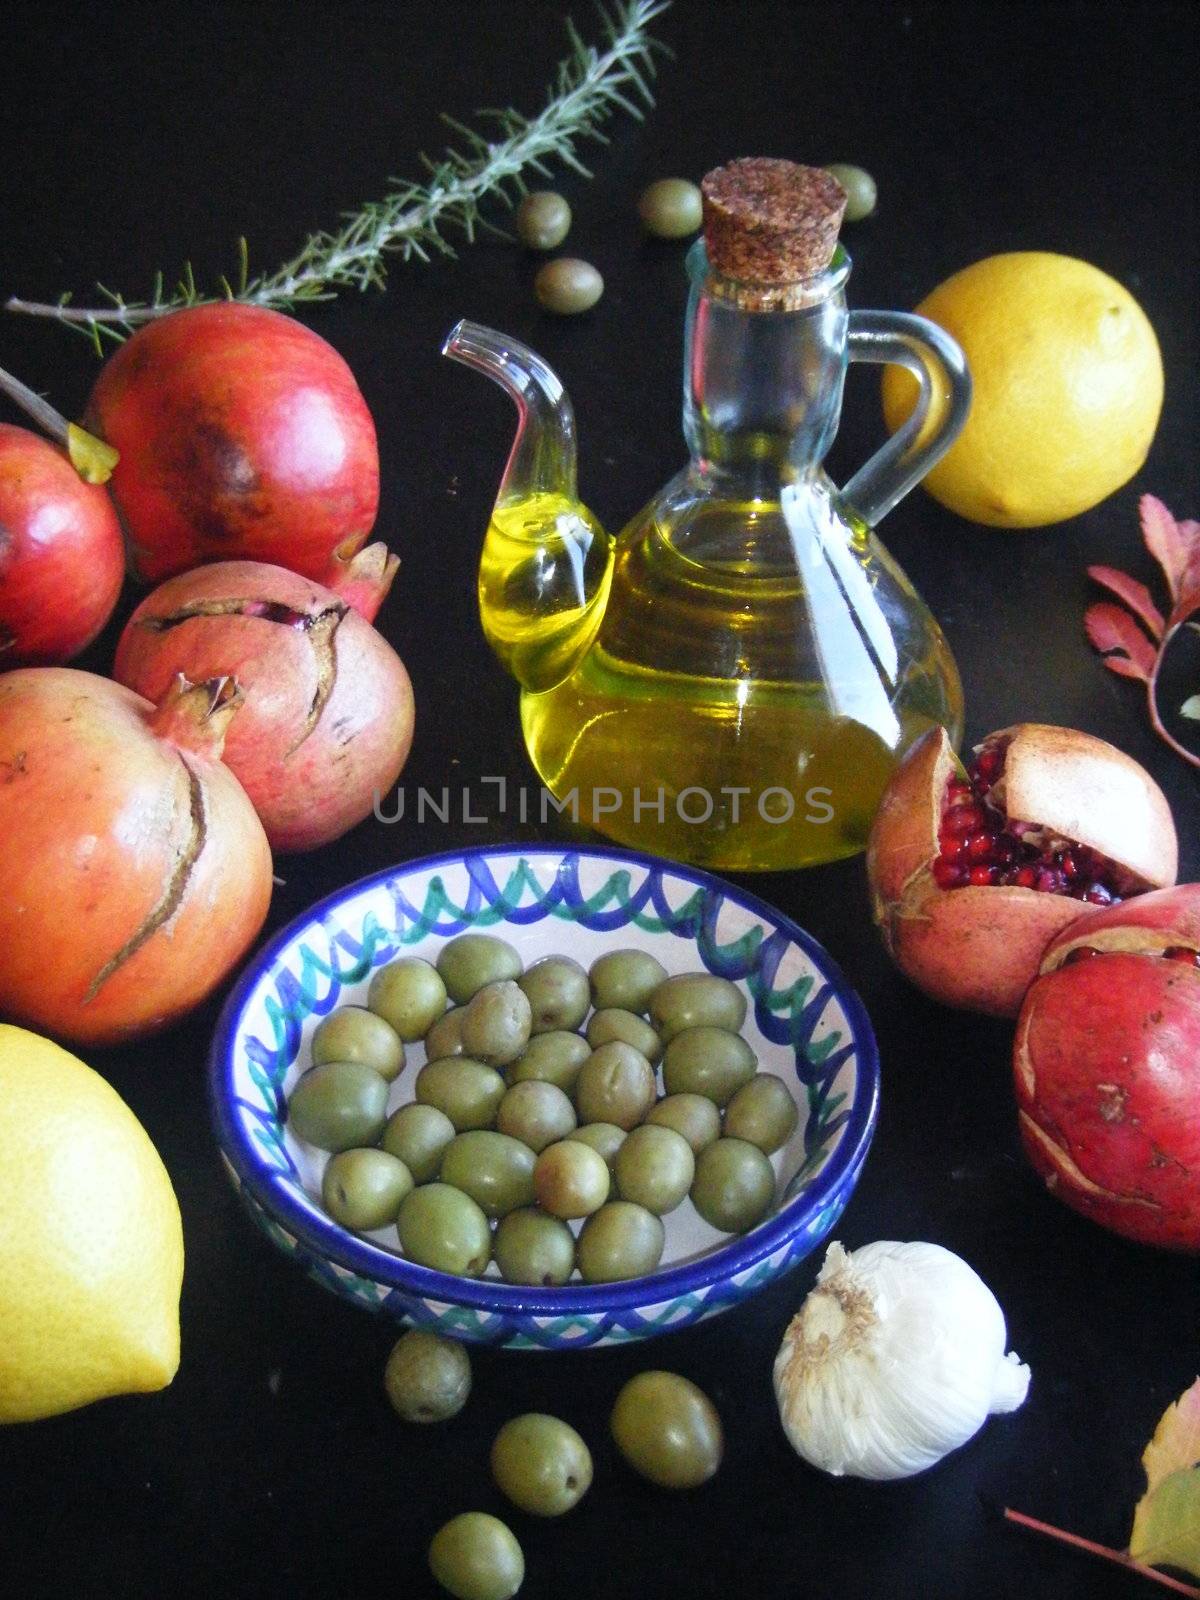 A jug of olive oil with olives and other fruits on a dark background.